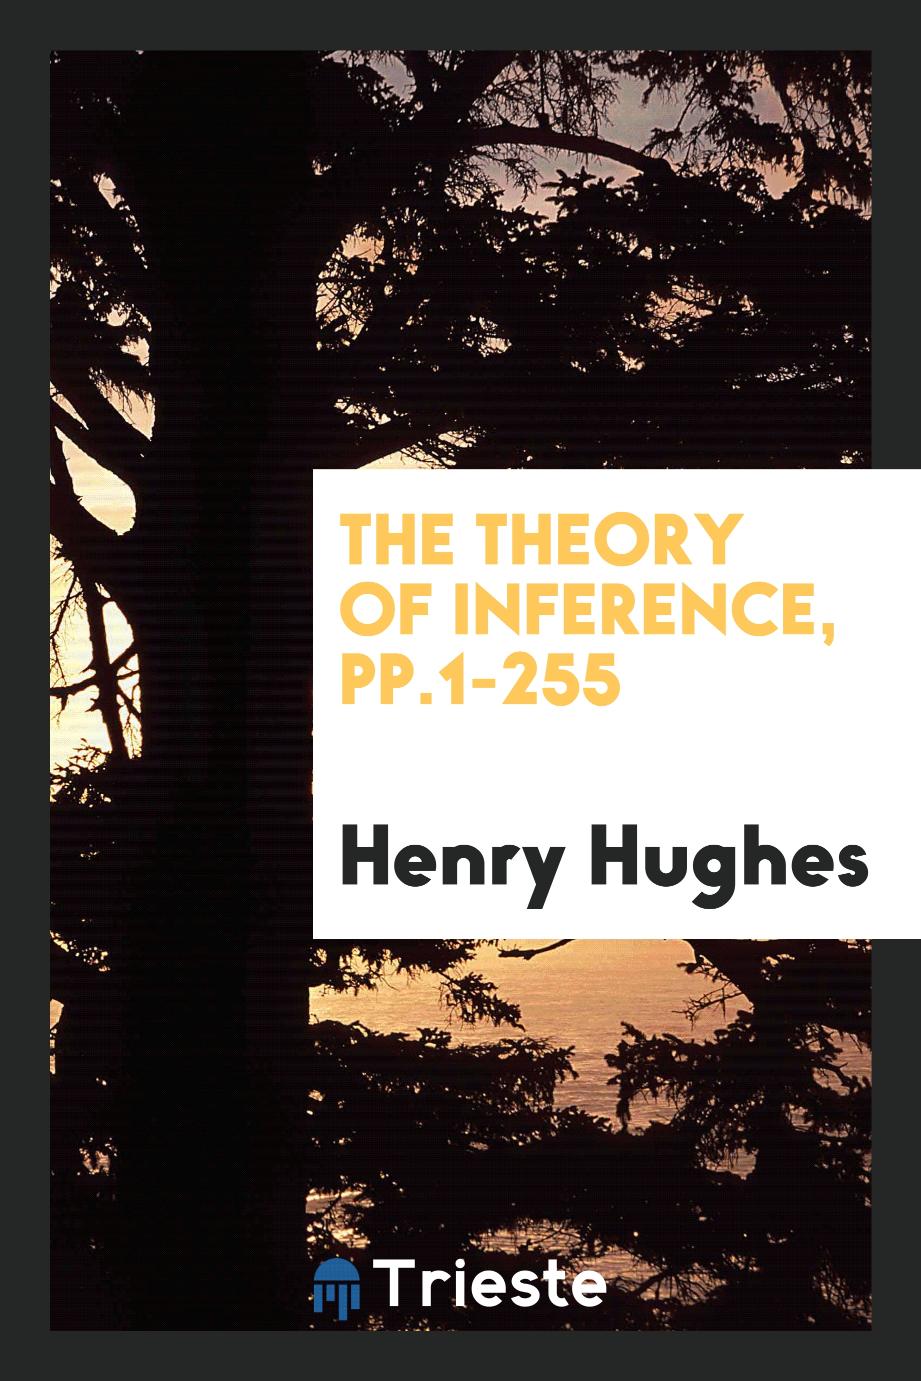 The Theory of Inference, pp.1-255